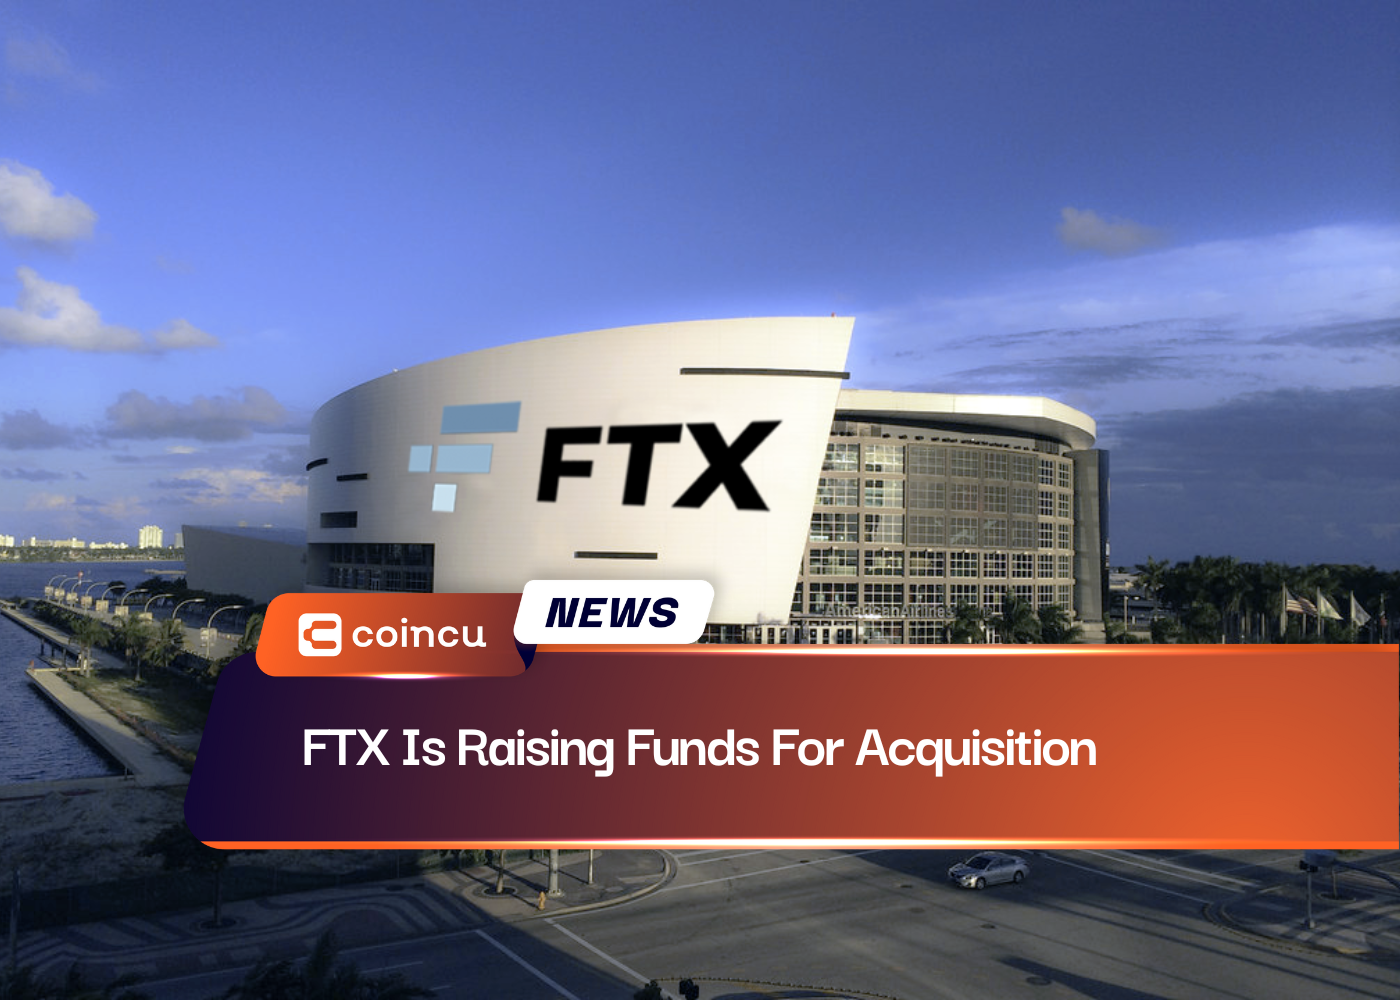 FTX Is Raising Funds For Acquisition